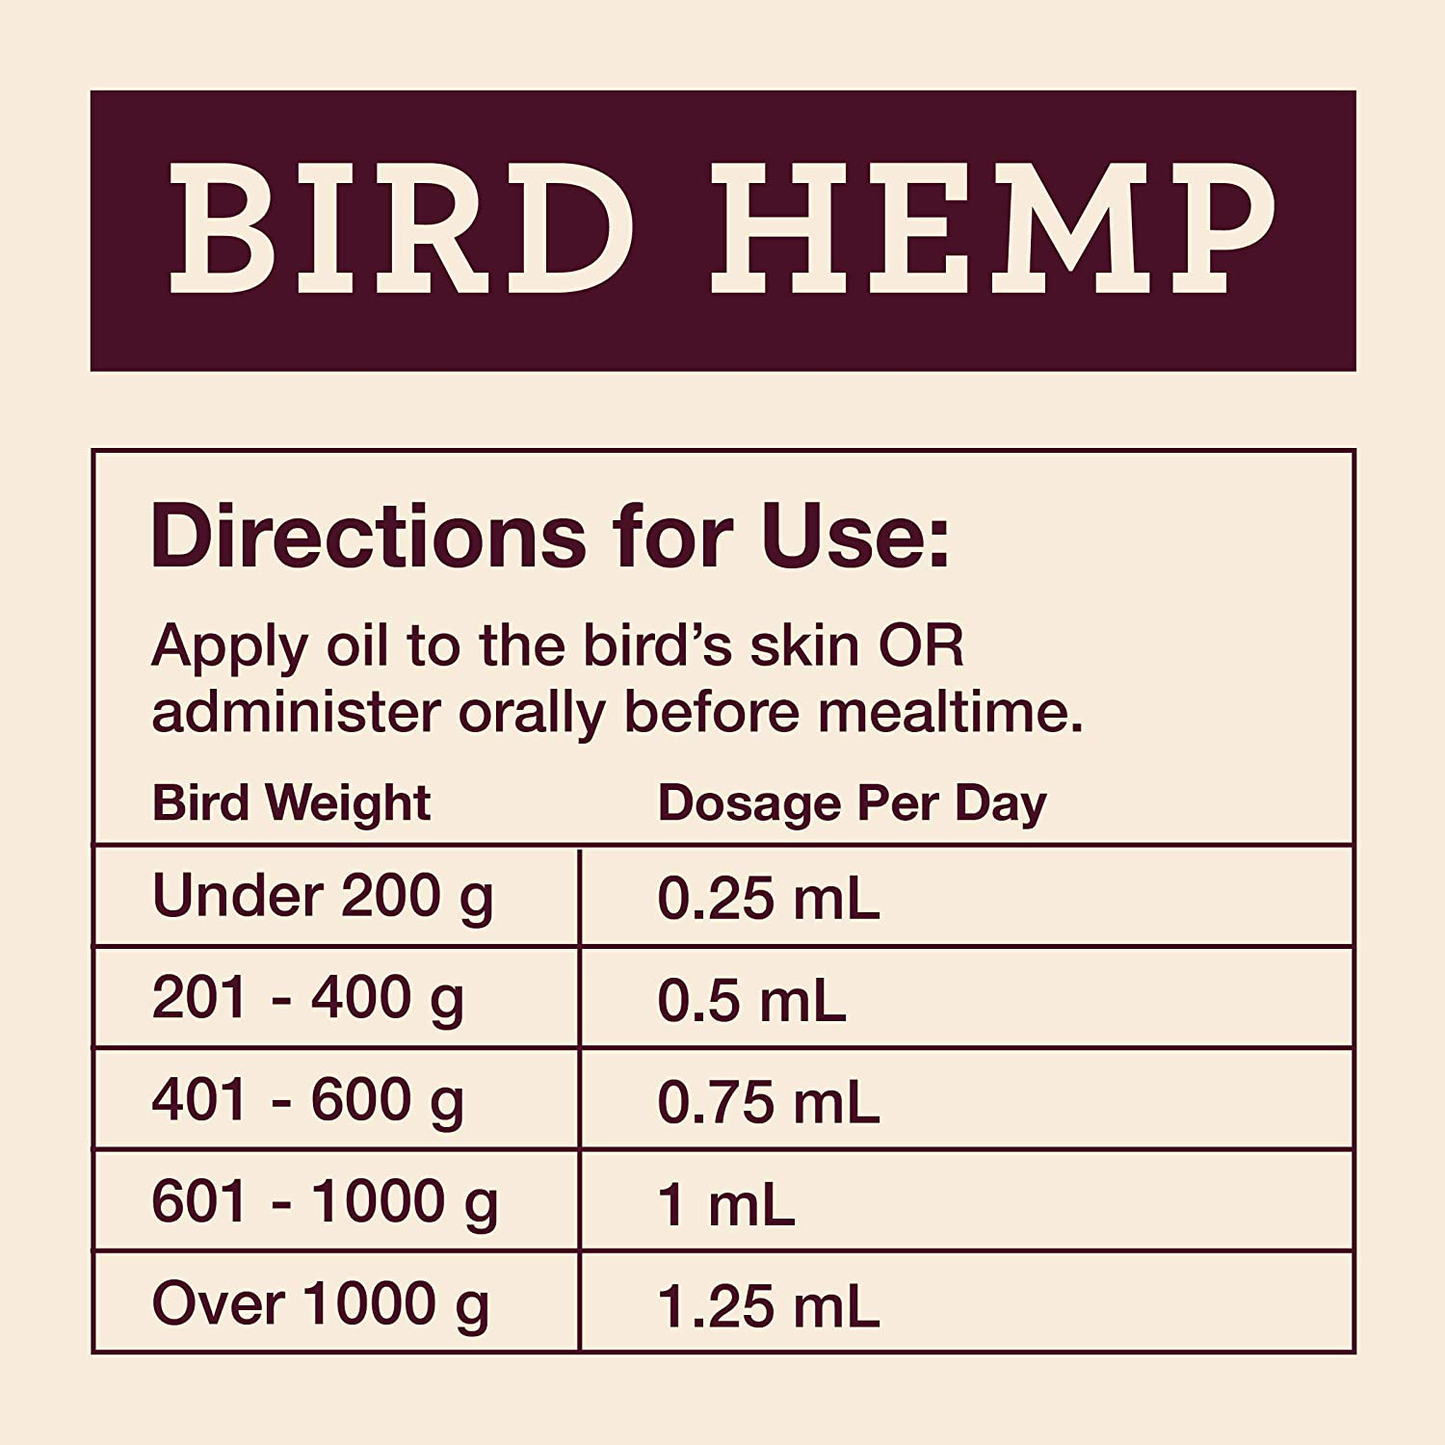 Hemp Well Bird Hemp Oil –Reduces Feather Plucking, Suppresses Destructive Behavior and Promotes Relaxation, Immune Support, Organically Sourced – 2 Ounces